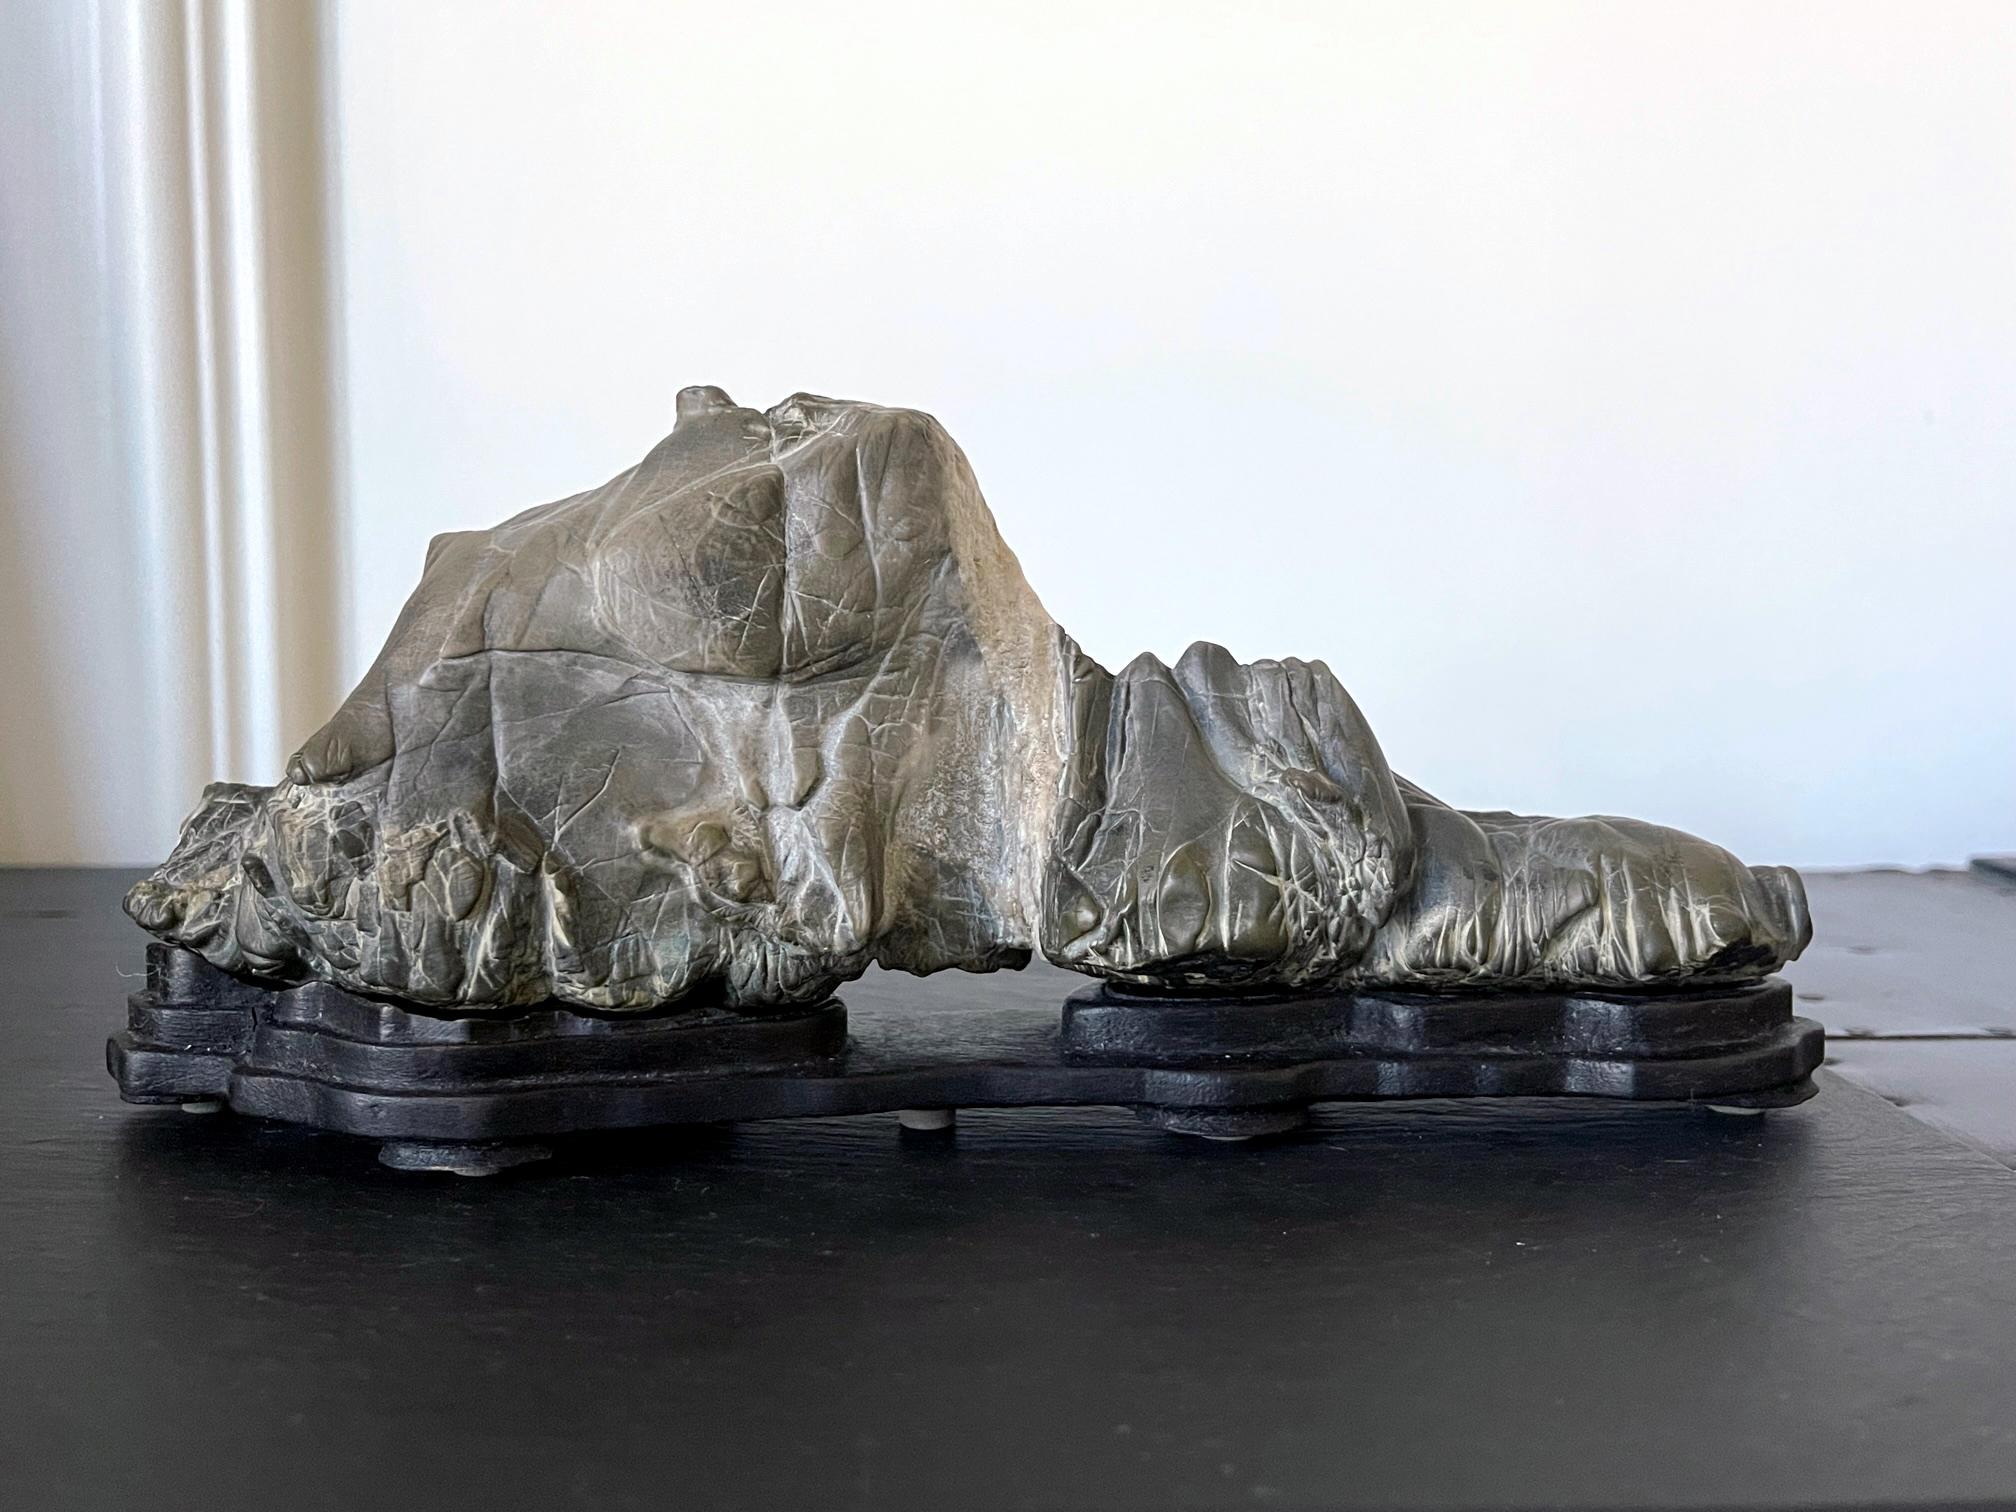 A small desk top Chinese scholar stones (also known as Gong Shi, meditation stone and spirit rock) on a fitted display wood stand circa 19th century. This is likely a grey Lingbi type stone with subtle arch mimics a horizontal mountain range. The